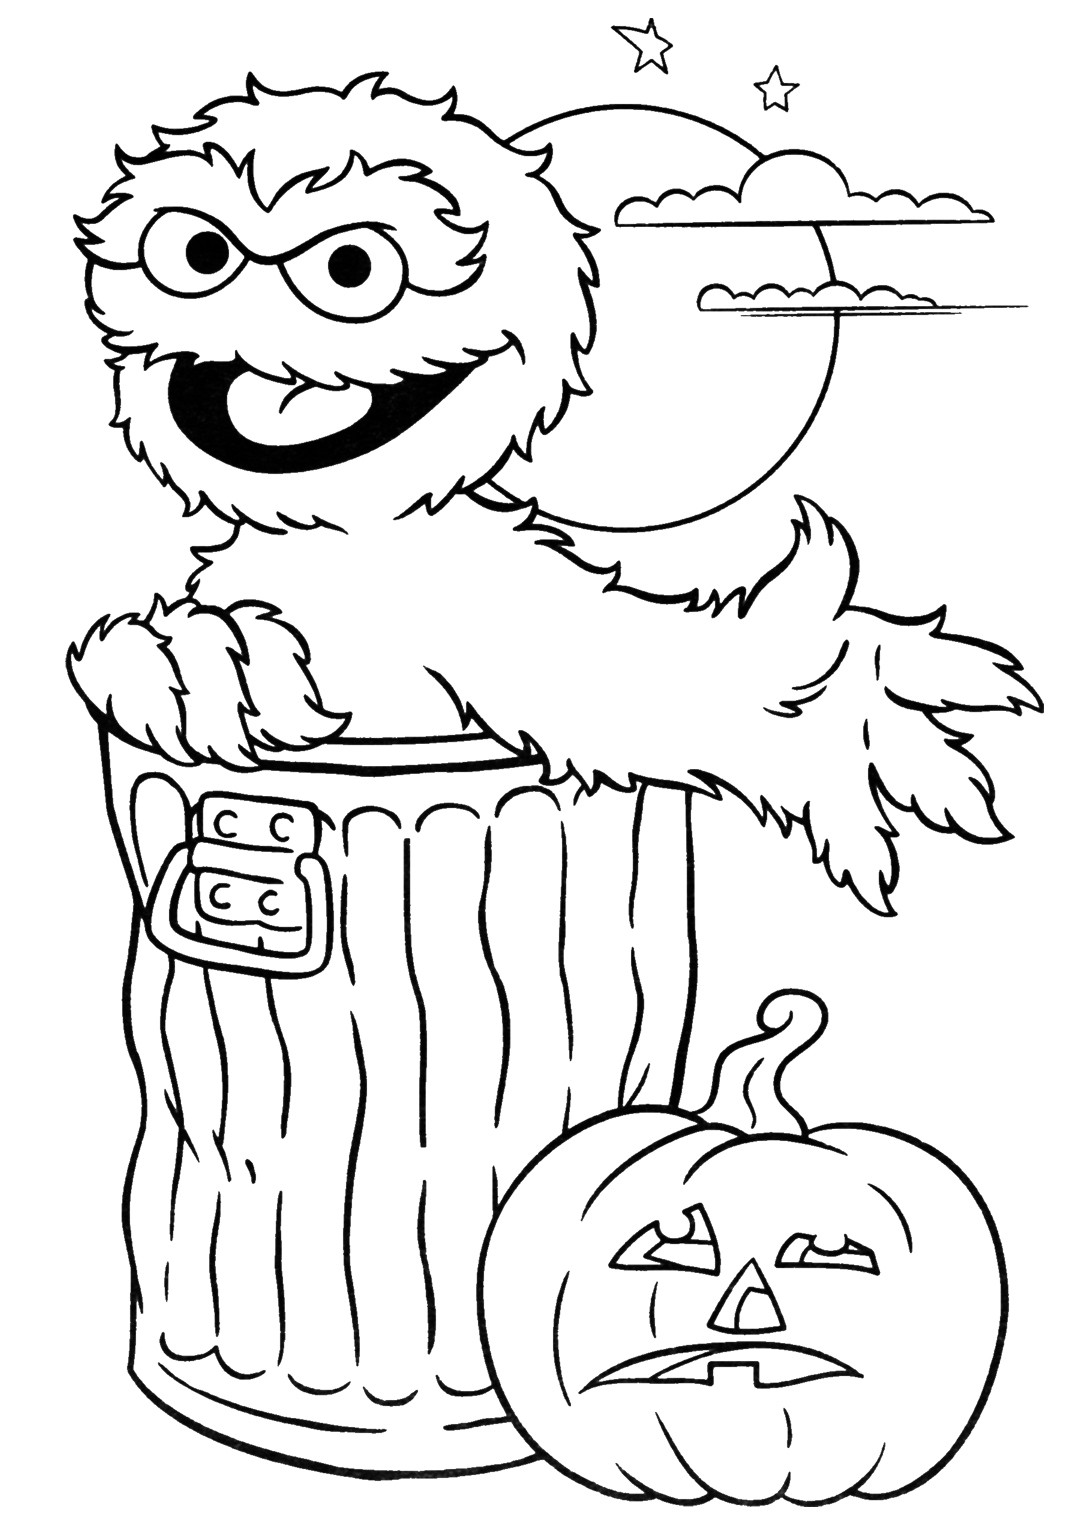 Printable Halloween Coloring Pages For Kids
 Halloween Printable Coloring Pages Minnesota Miranda